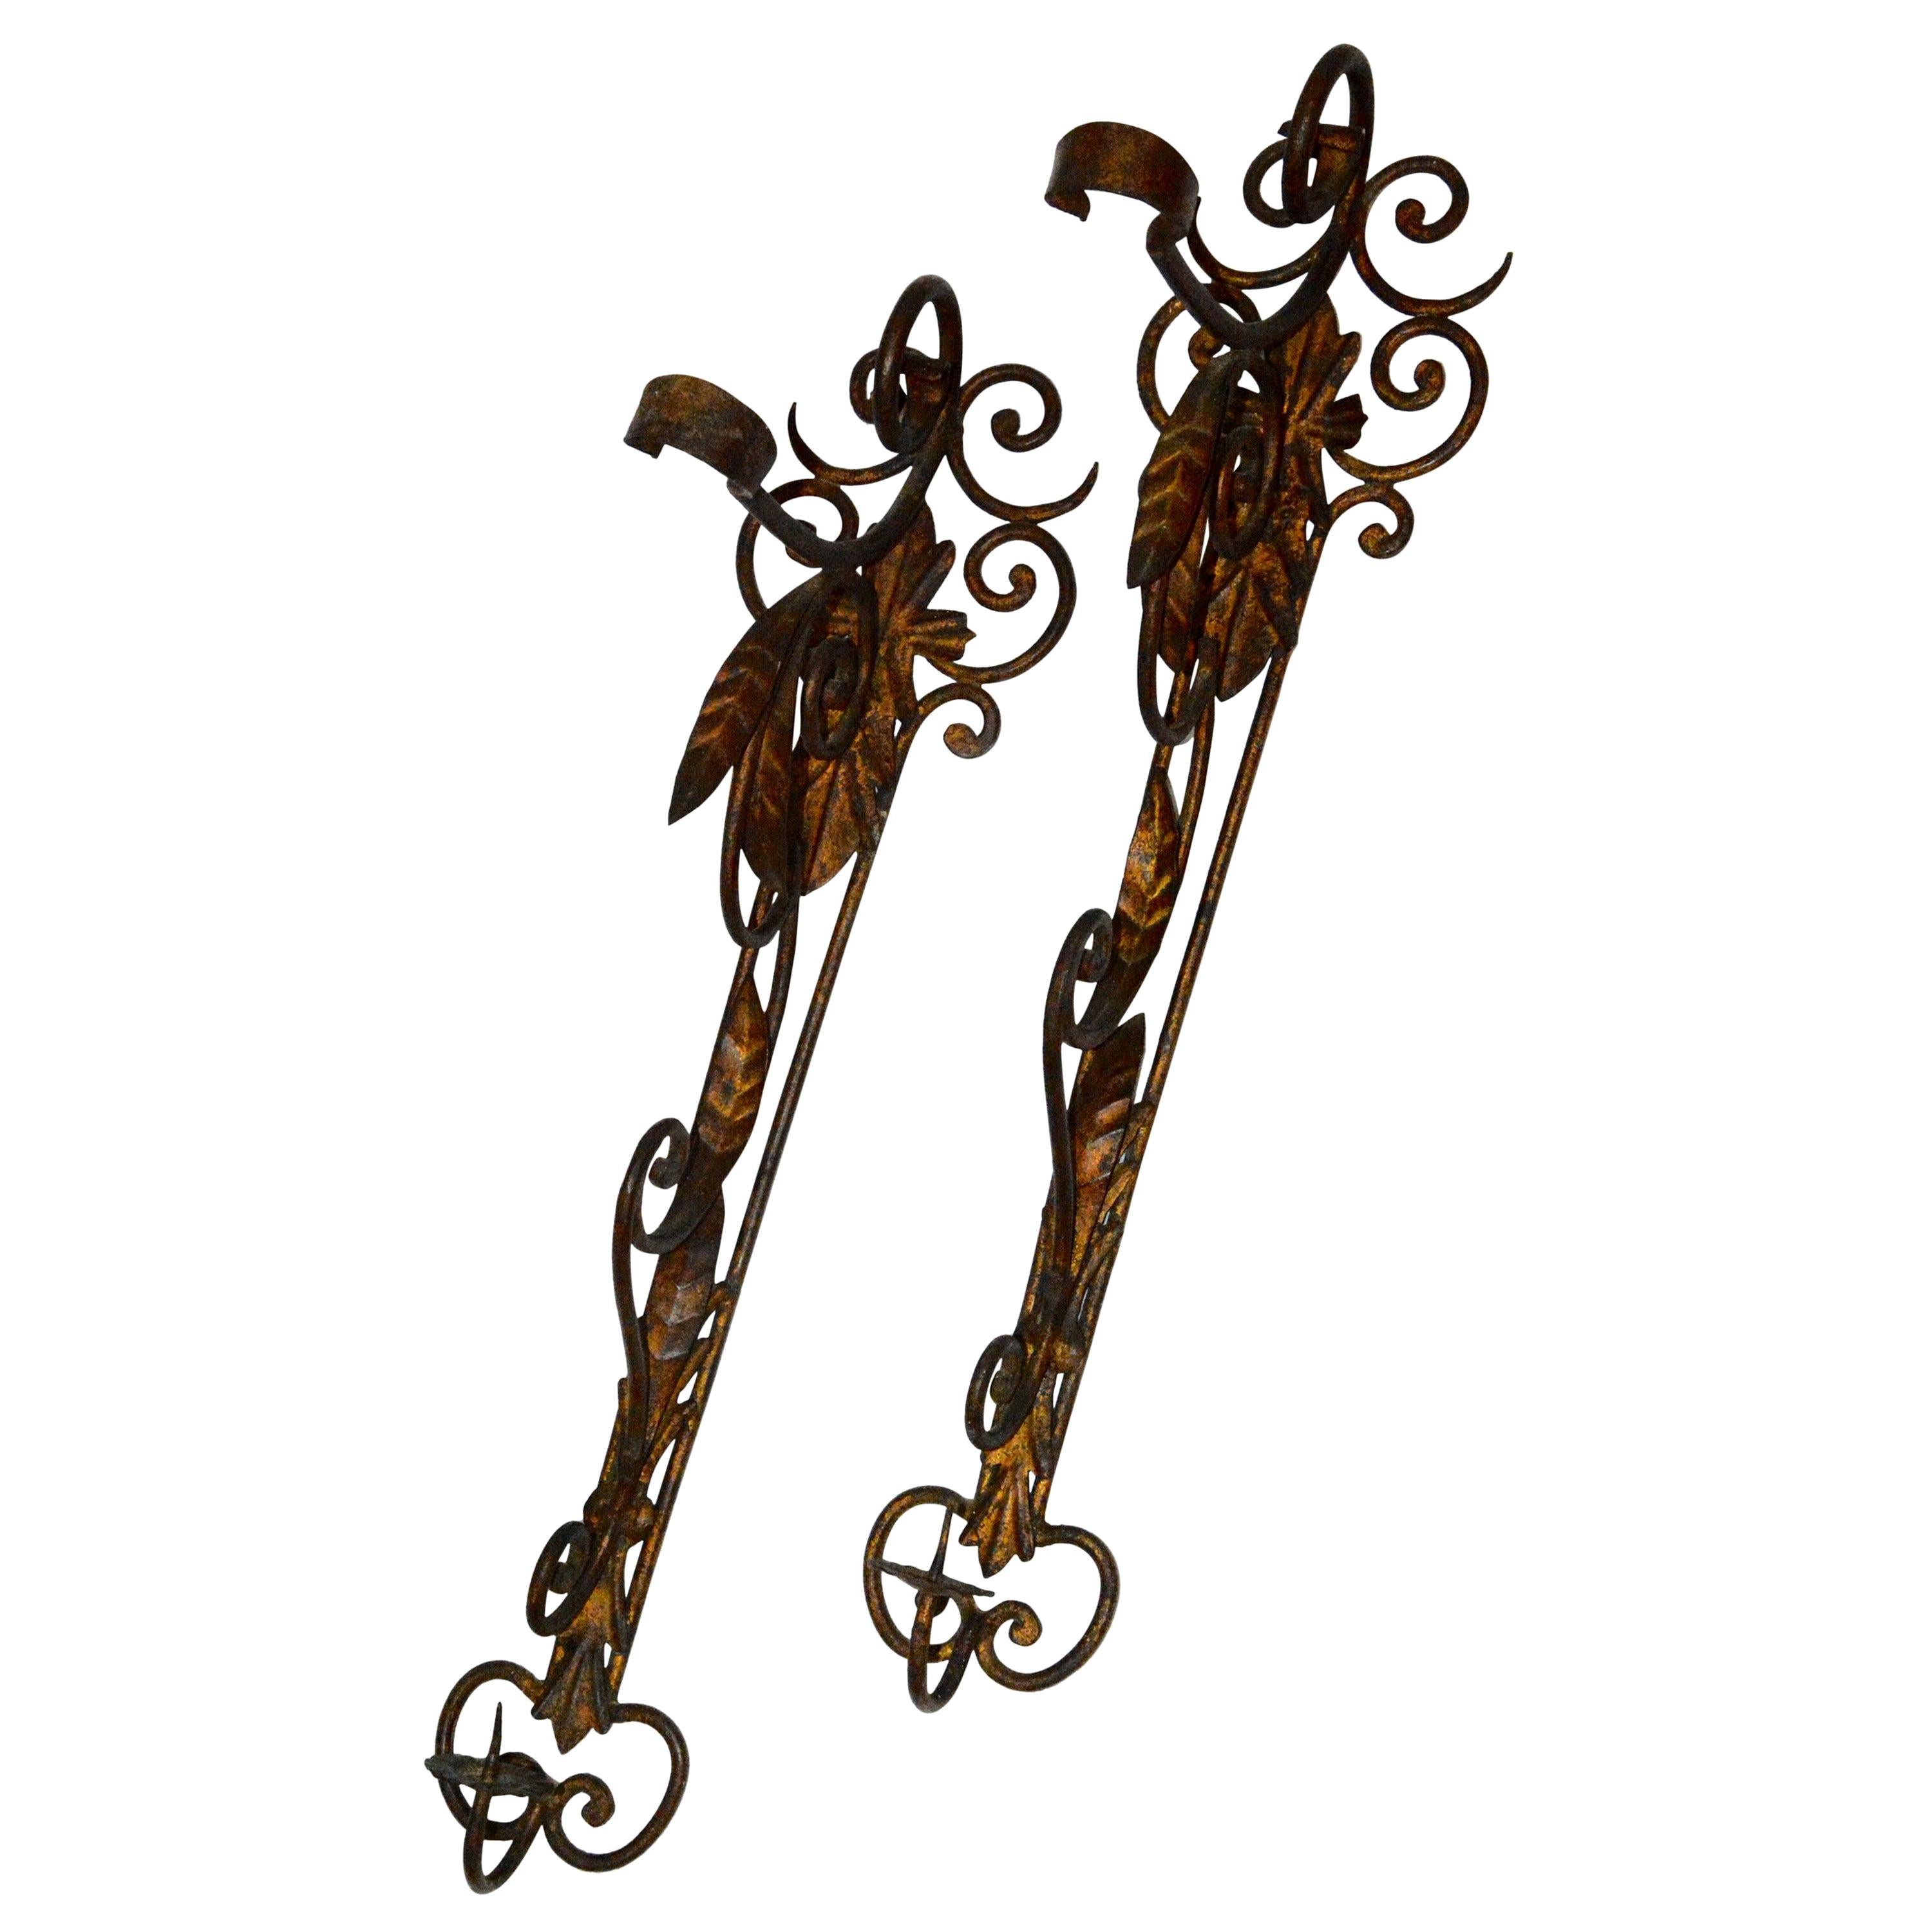 Metal Candleholder Wall Sconces with Foliate and Scrolls For Sale